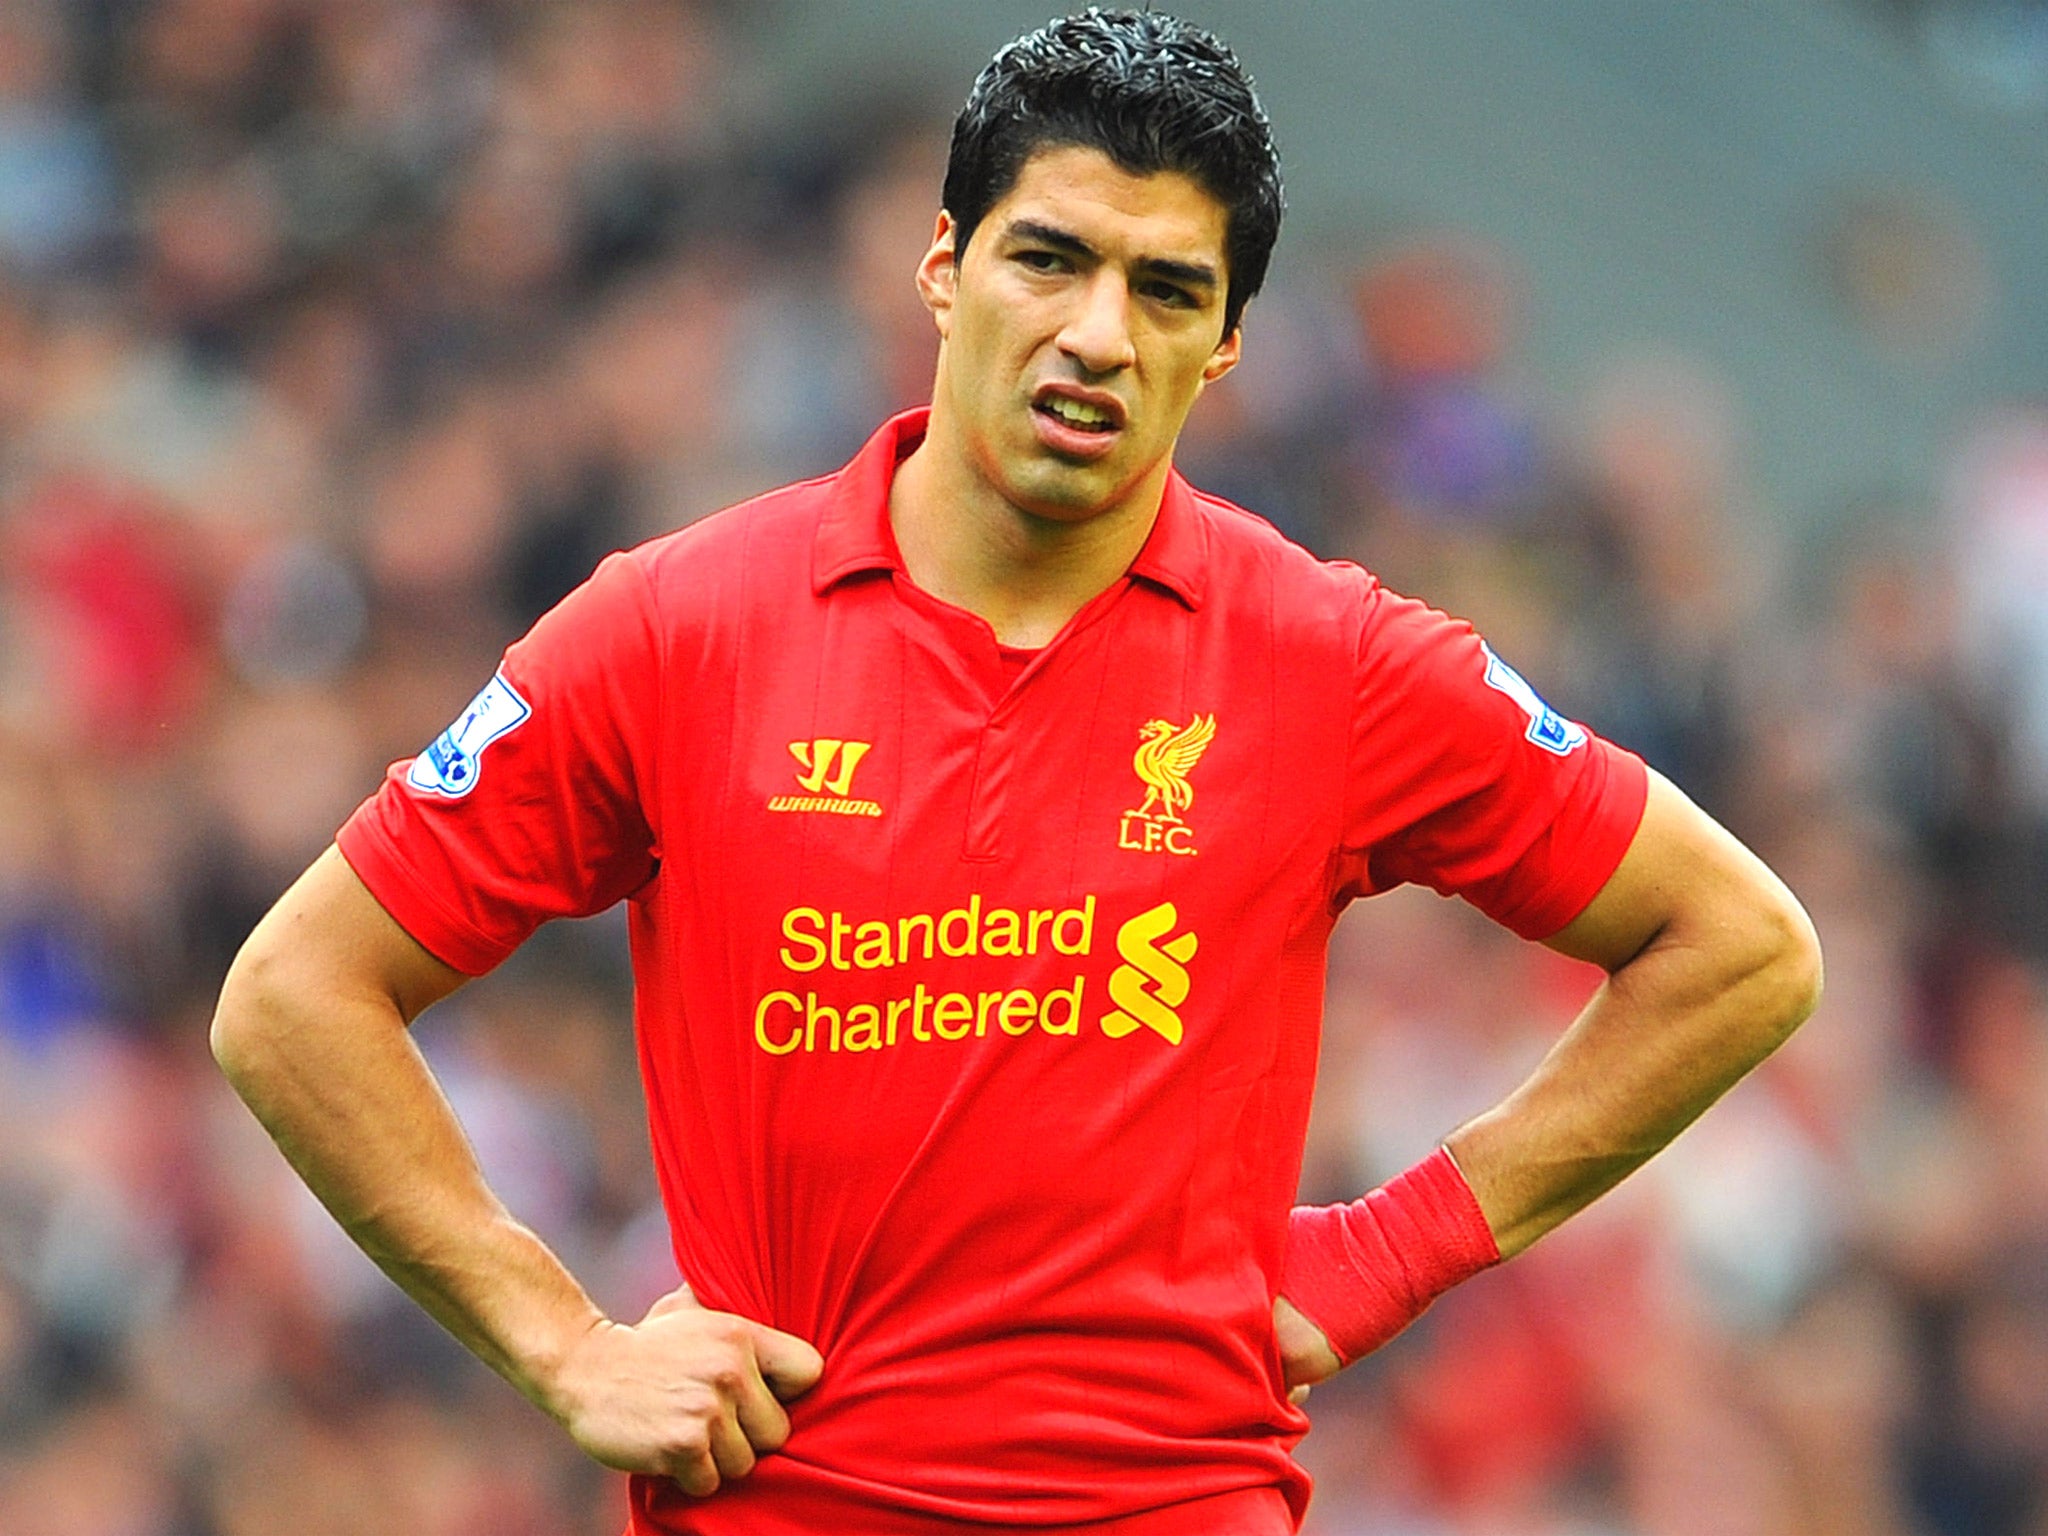 Luis Suarez is currently serving a 10-match ban for biting